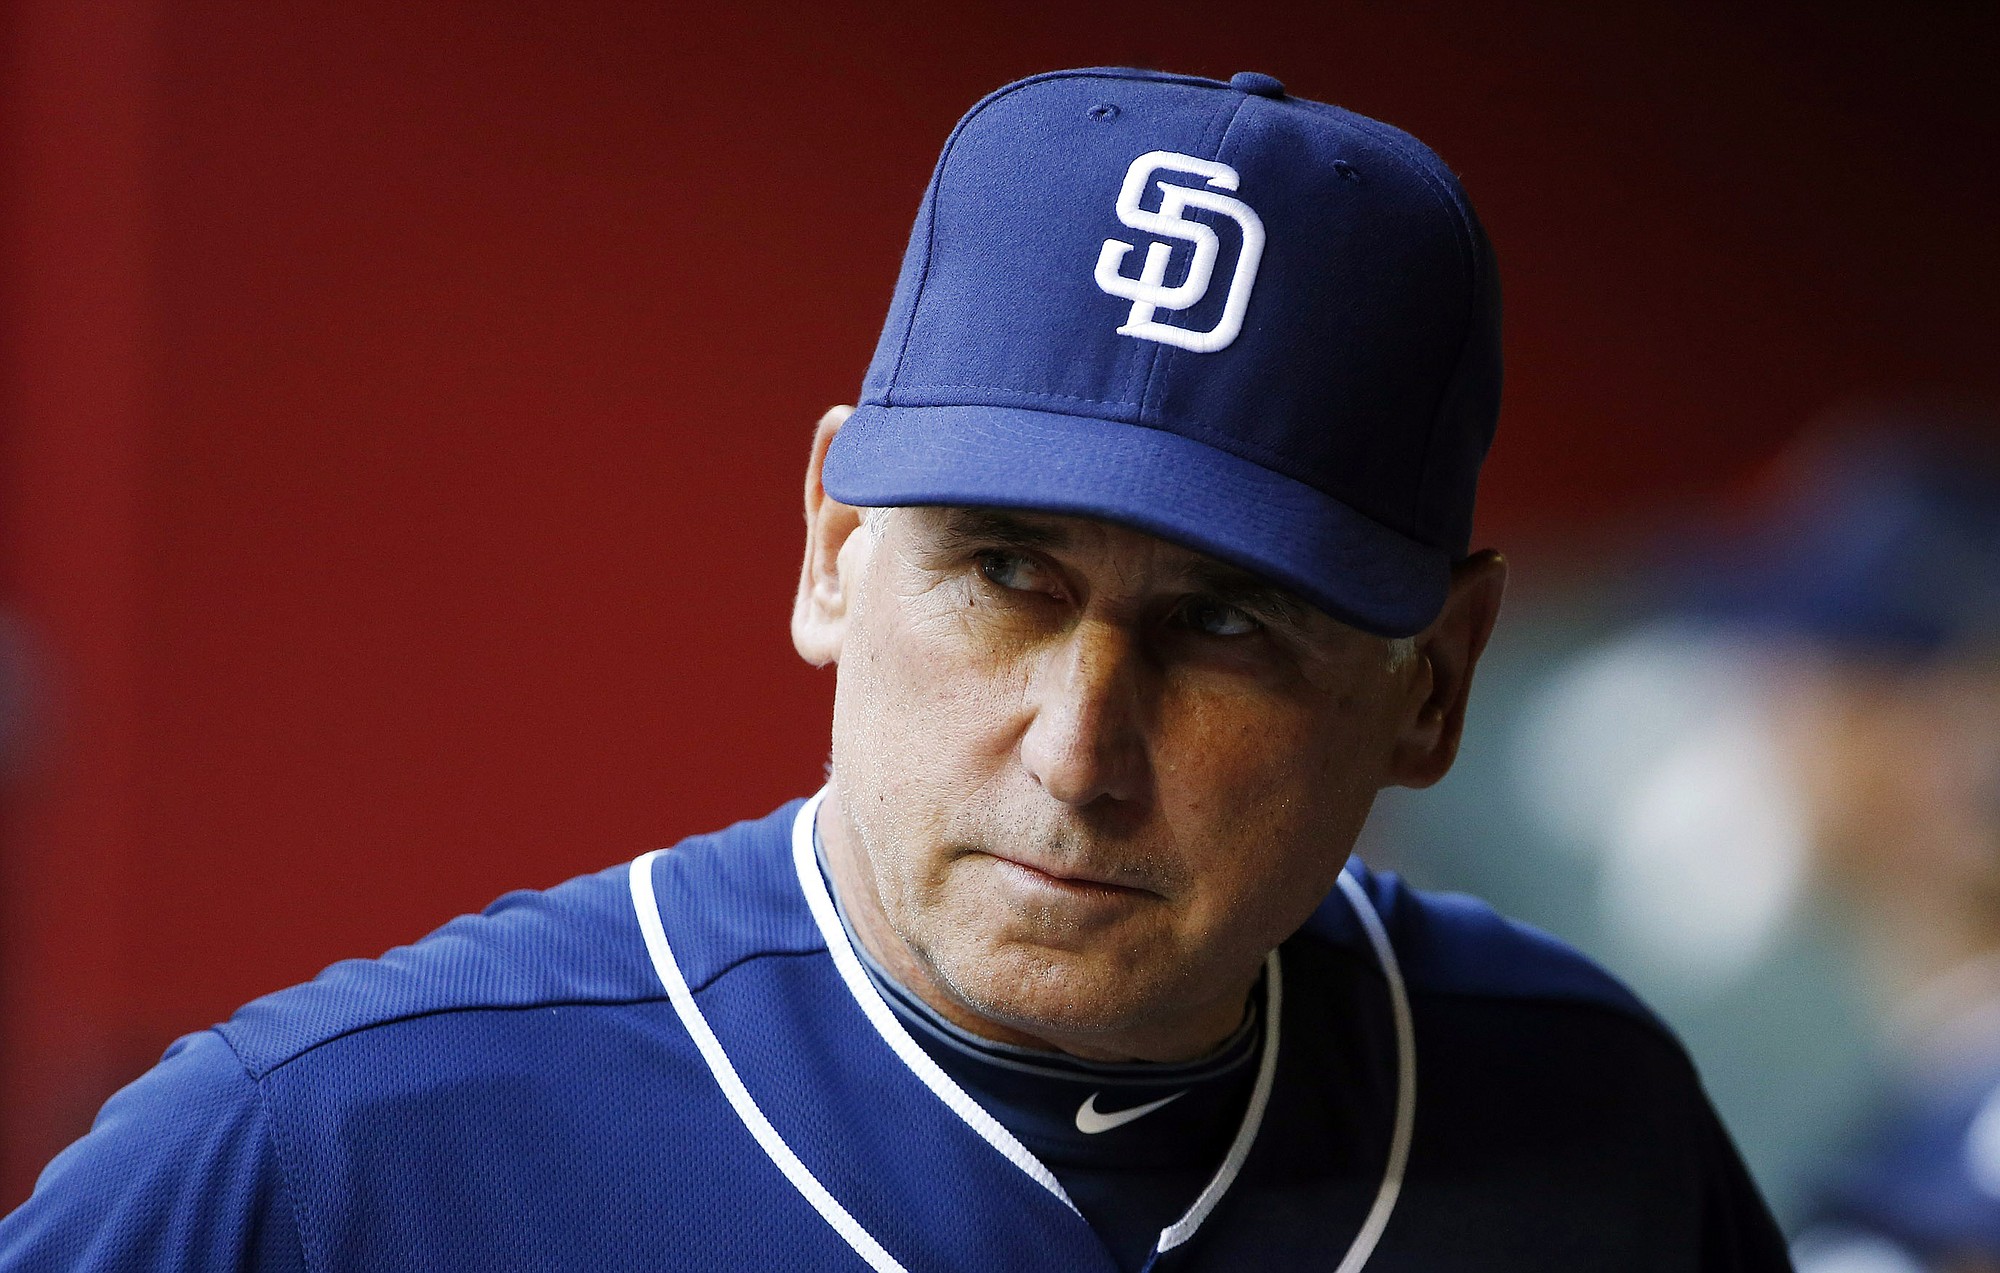 San Diego Padres' Bud Black paces in the dugout prior to a baseball game against the Arizona Diamondbacks in Phoenix. The Padres fired Black on Monday, June 15, 2015, after hovering around .500 with a roster that was overhauled in the offseason. (AP Photo/Ross D.